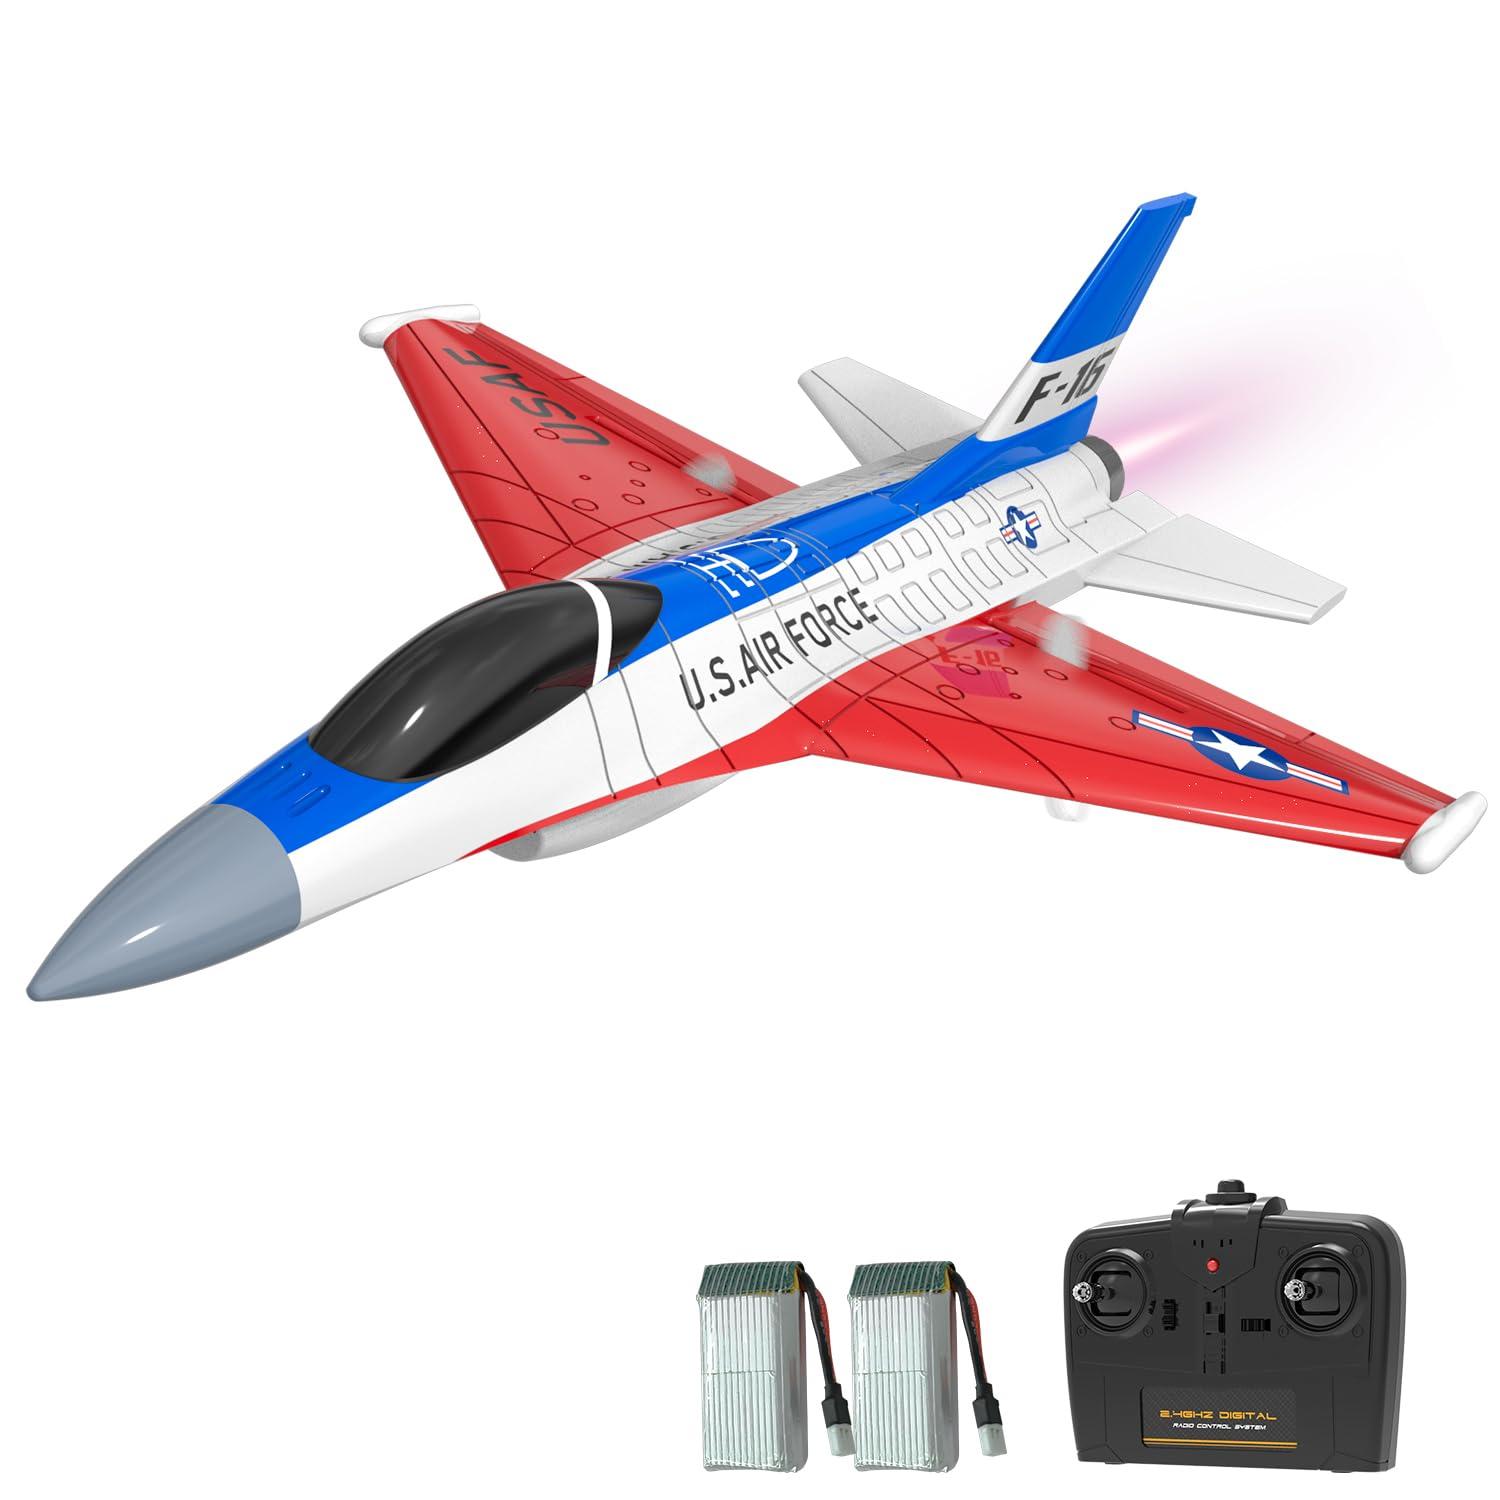 Fastest Rc Jet Airplane: Building Skills and Finding Community: The Allure of Fast RC Jet Airplanes